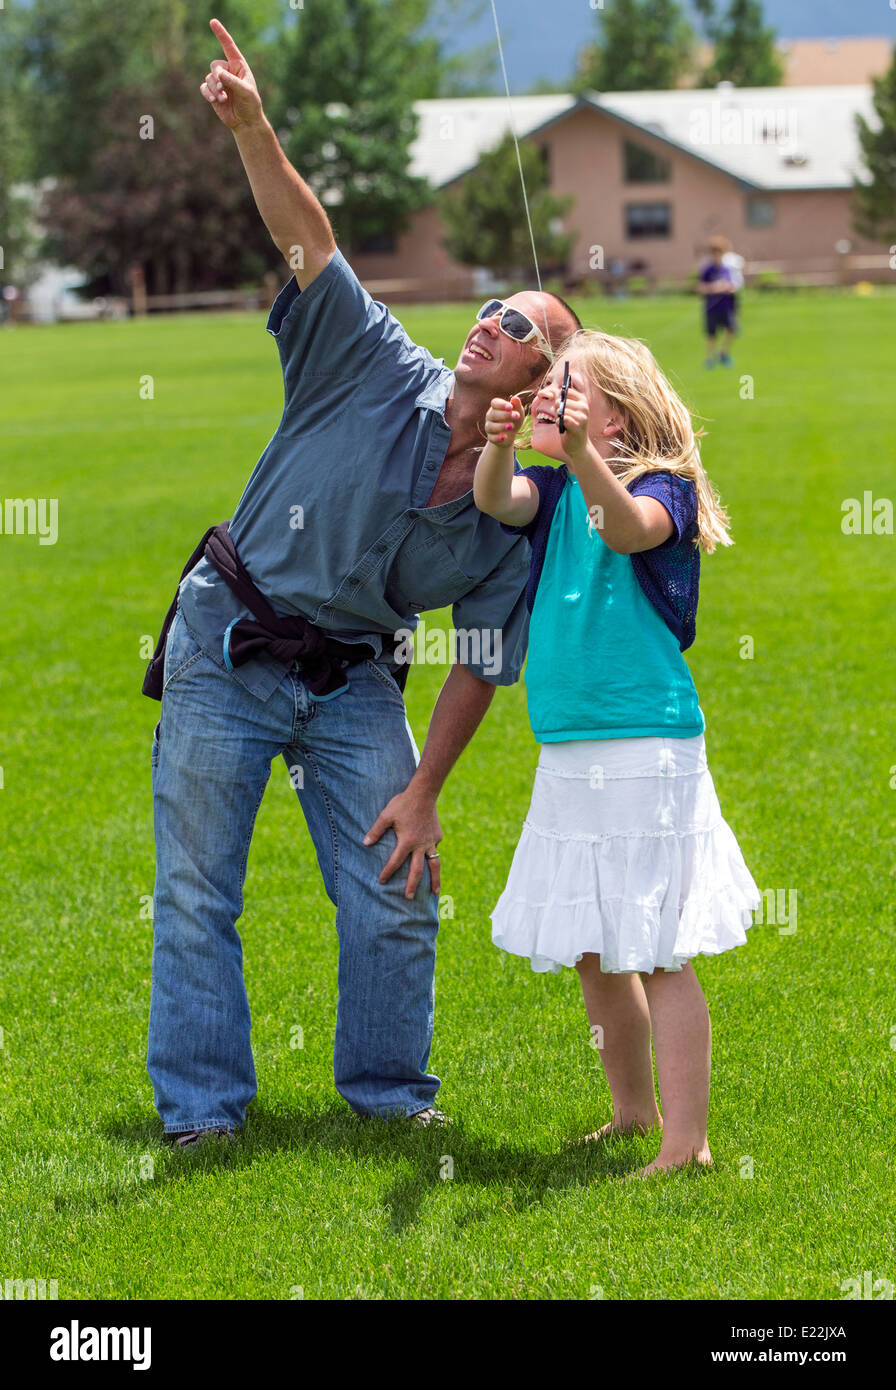 Father & young daughter flying a kite on a grassy field Stock Photo